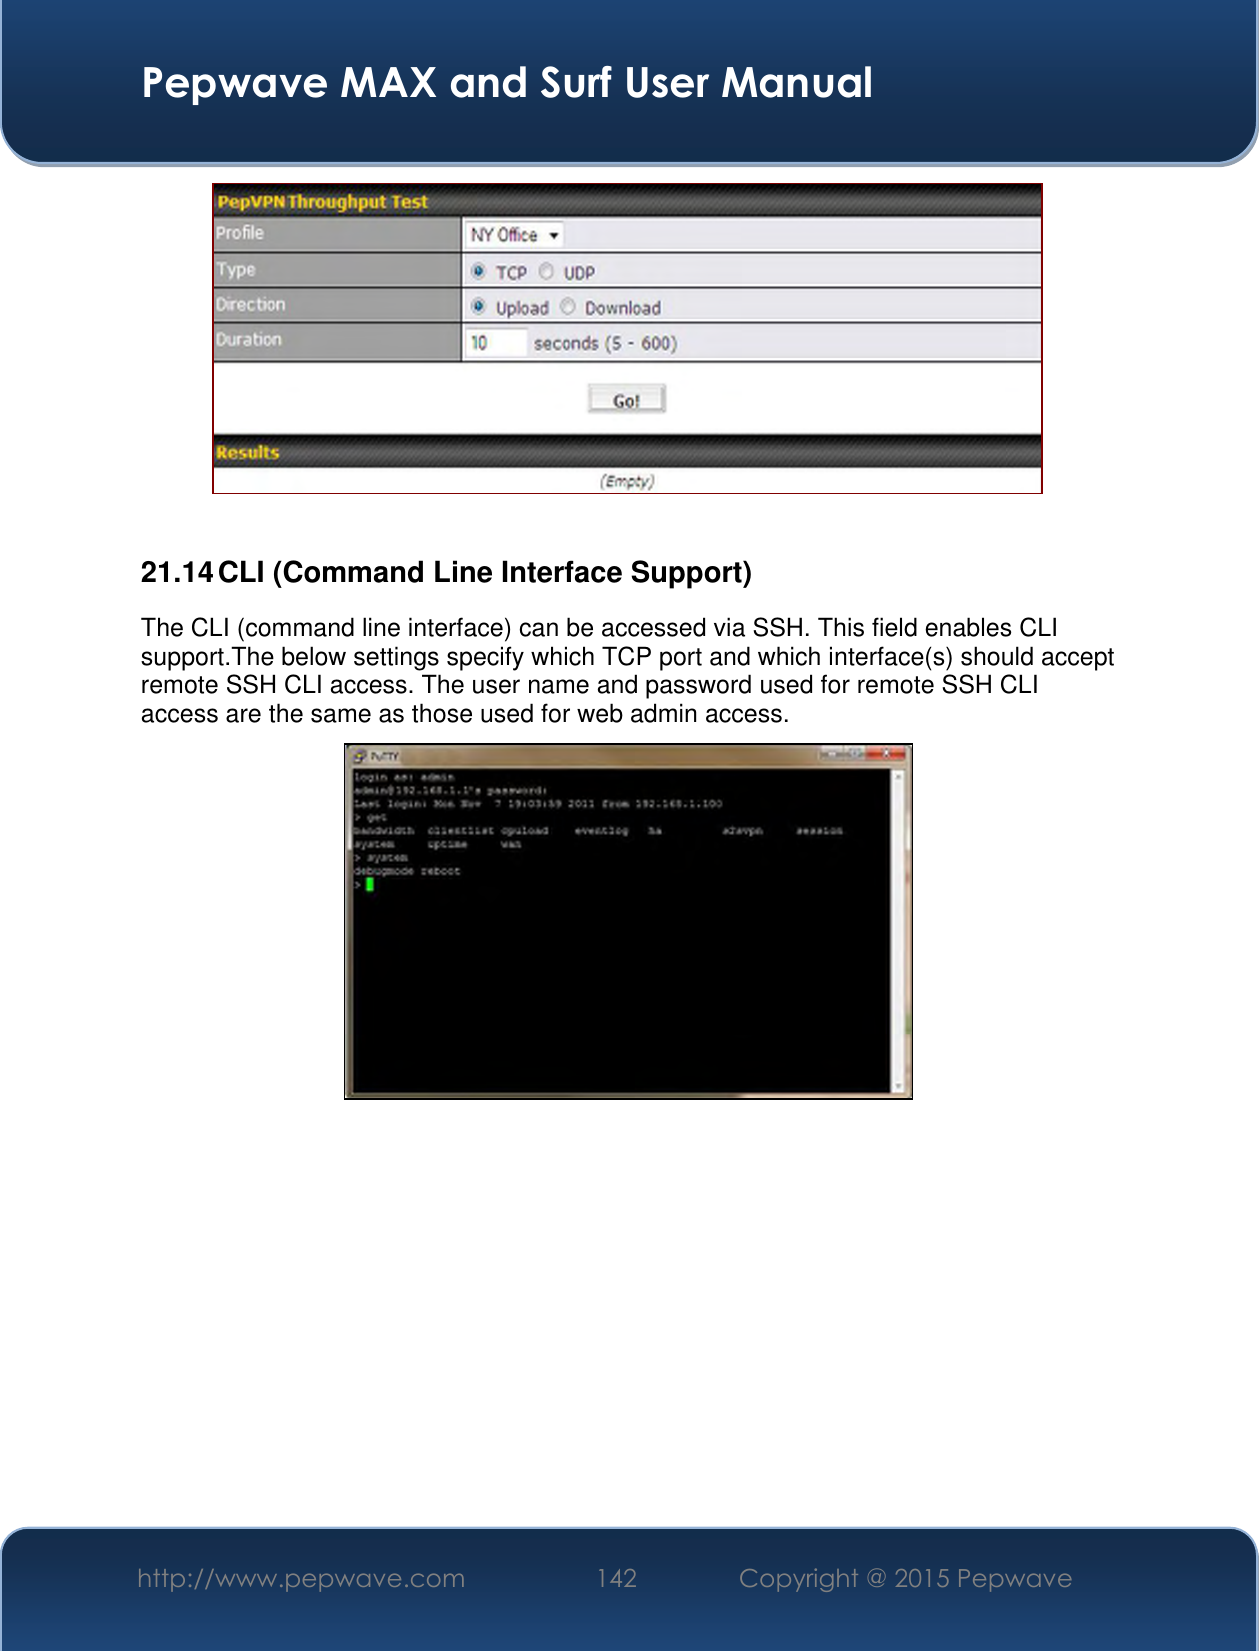  Pepwave MAX and Surf User Manual http://www.pepwave.com 142 Copyright @ 2015 Pepwave     21.14 CLI (Command Line Interface Support) The CLI (command line interface) can be accessed via SSH. This field enables CLI support.The below settings specify which TCP port and which interface(s) should accept remote SSH CLI access. The user name and password used for remote SSH CLI access are the same as those used for web admin access.    